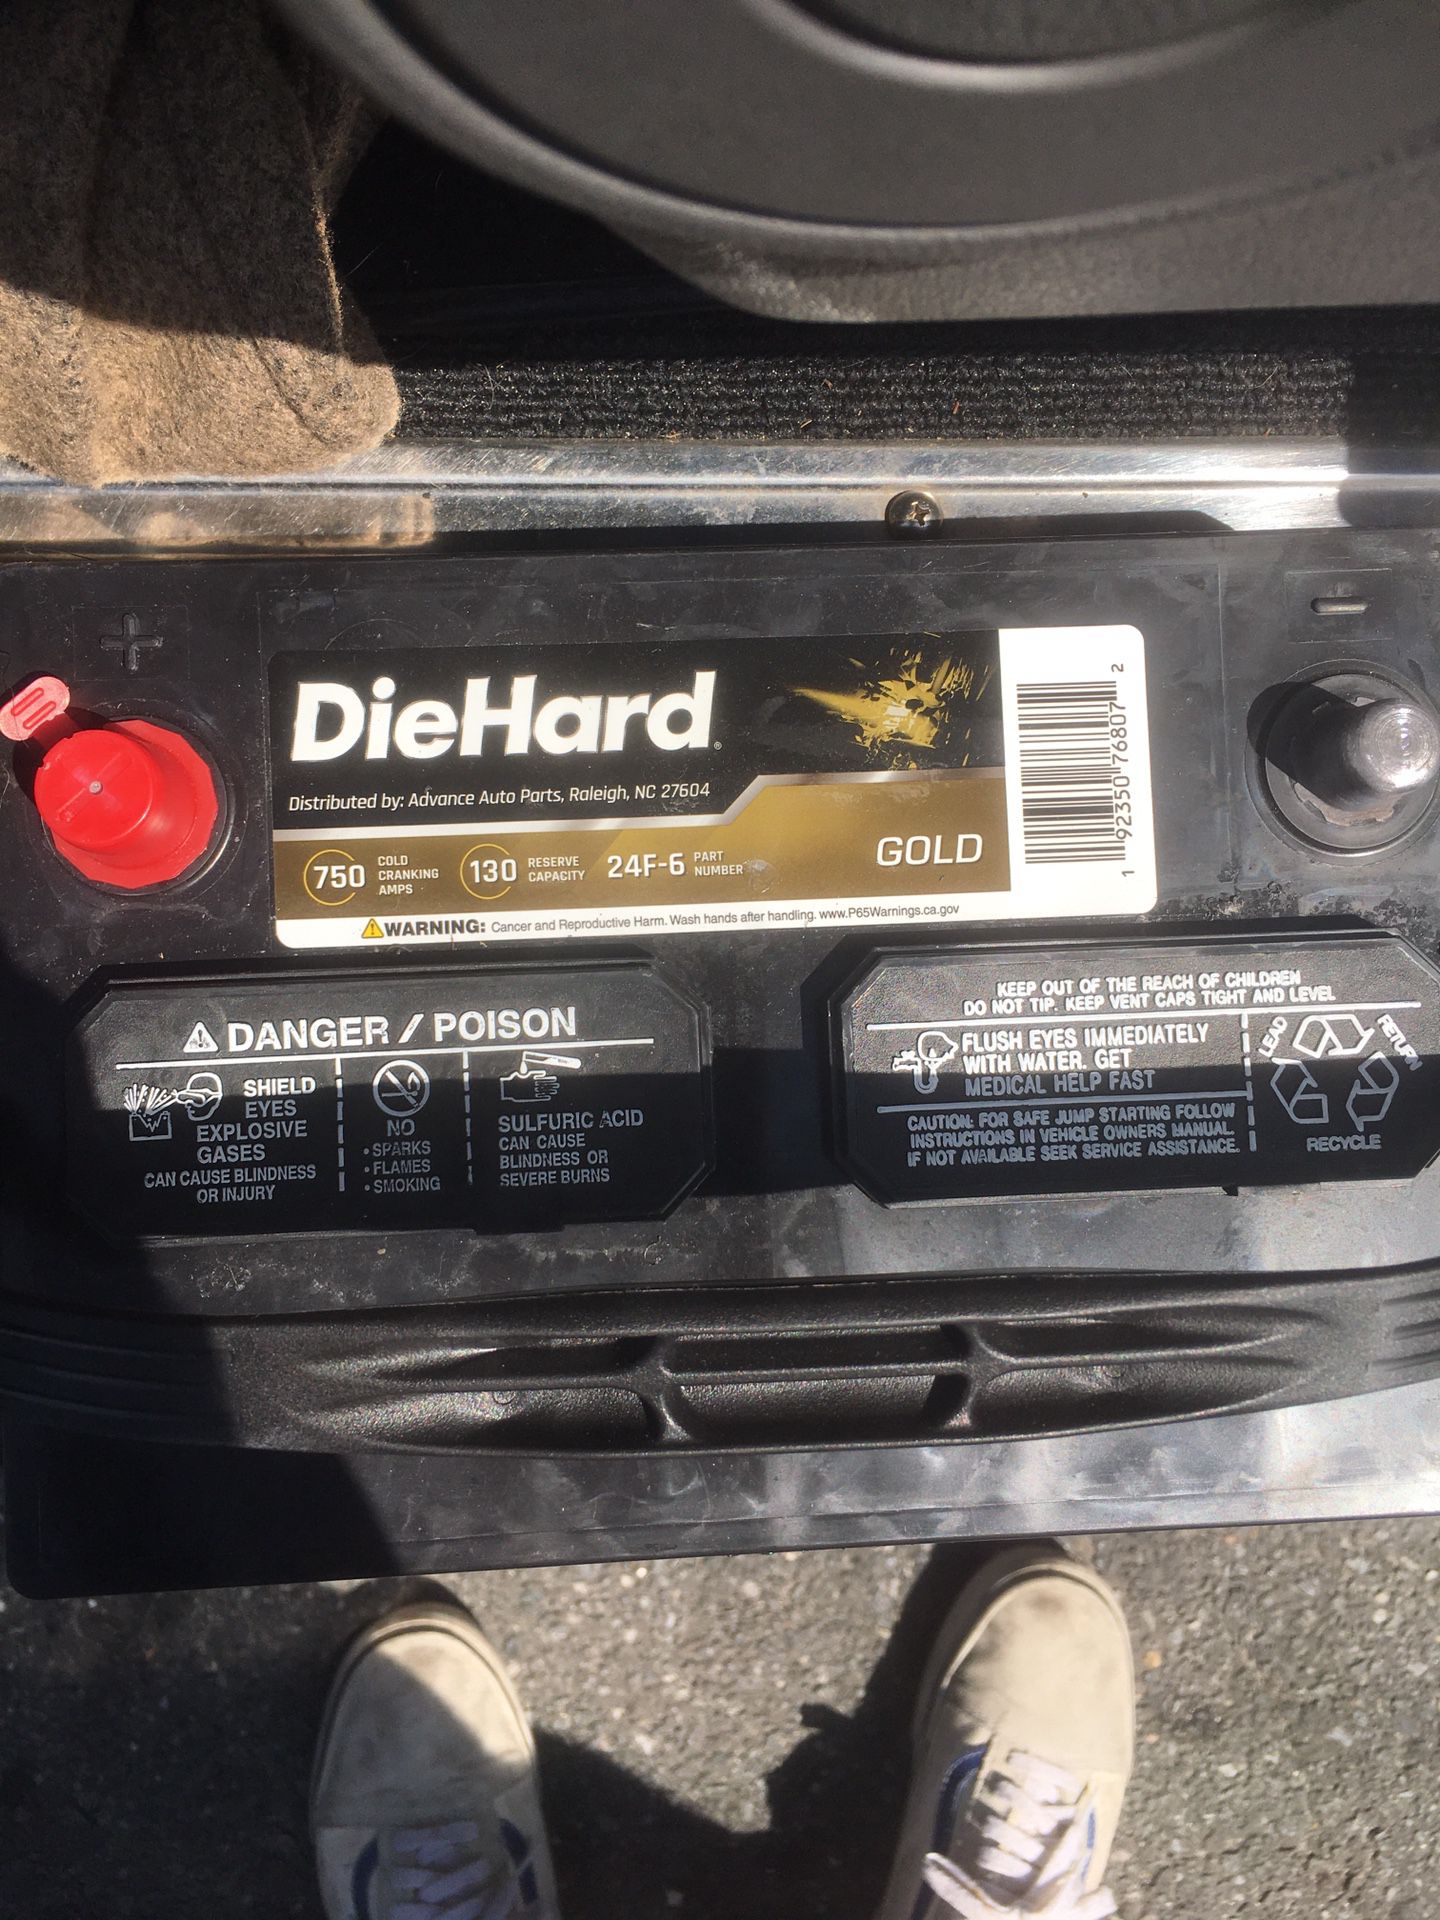 Brand New DieHard Gold Car Battery 24F for Sale in Cape May Ch, NJ - OfferUp